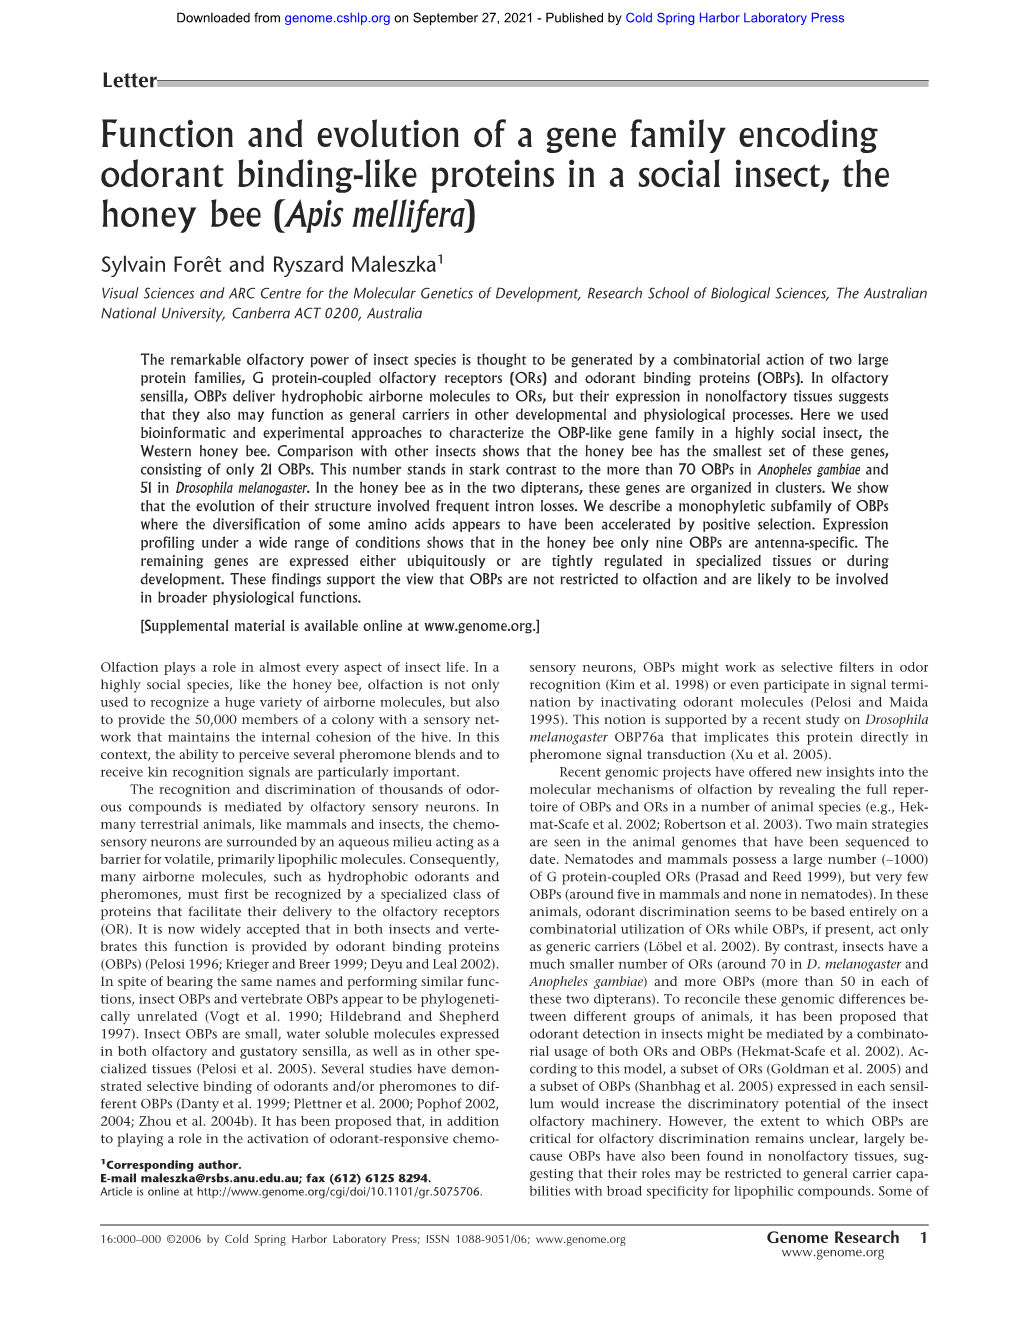 Function and Evolution of a Gene Family Encoding Odorant Binding-Like Proteins in a Social Insect, the Honey Bee (Apis Mellifera)